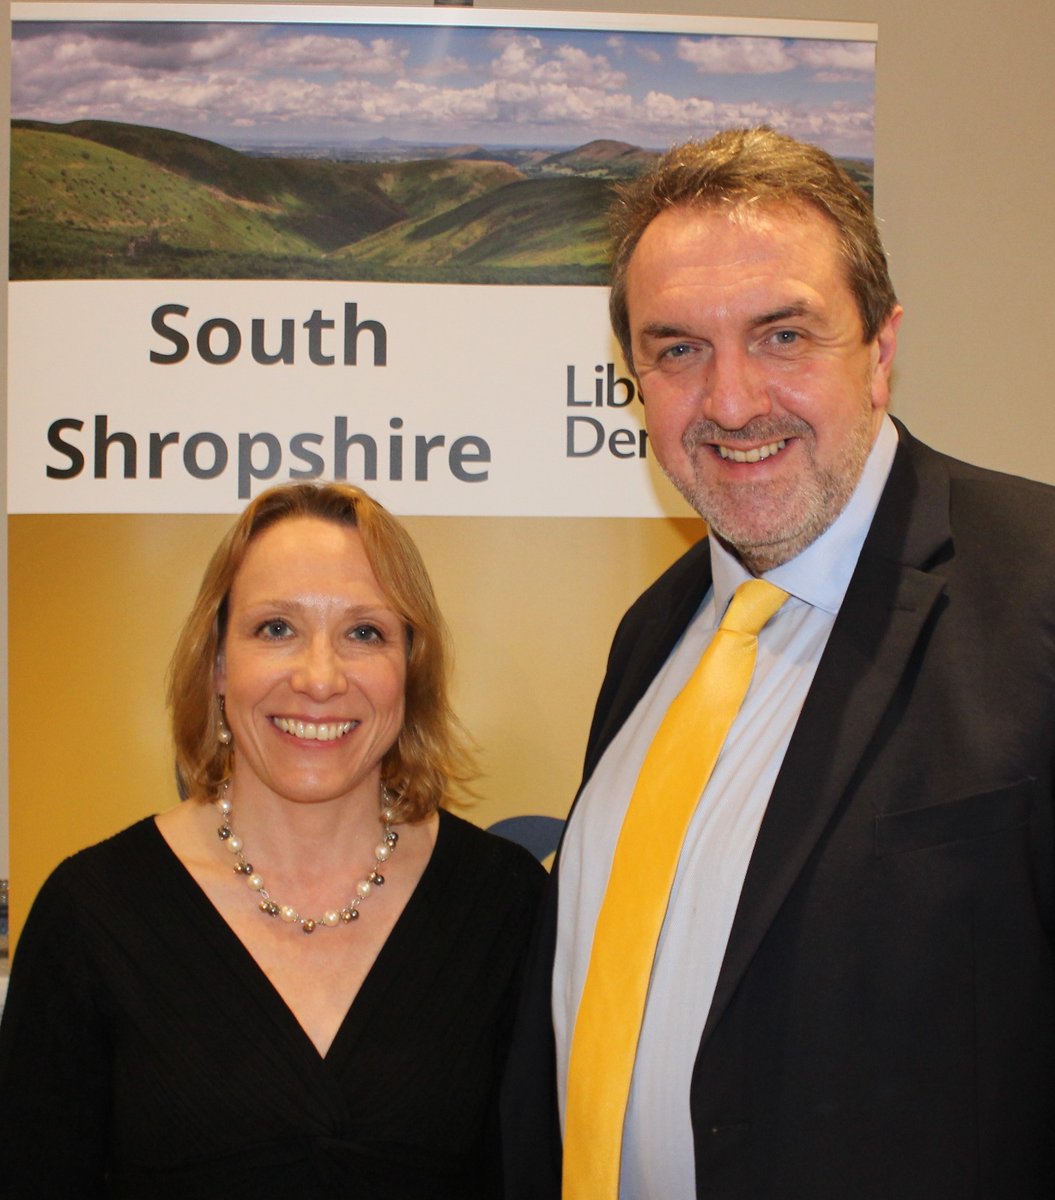 A well-attended fundraising dinner with Helen Morgan MP at Astbury Hall has helped to launch my campaign to win South Shropshire constituency from the Conservatives at the next General Election. #SouthShropshire